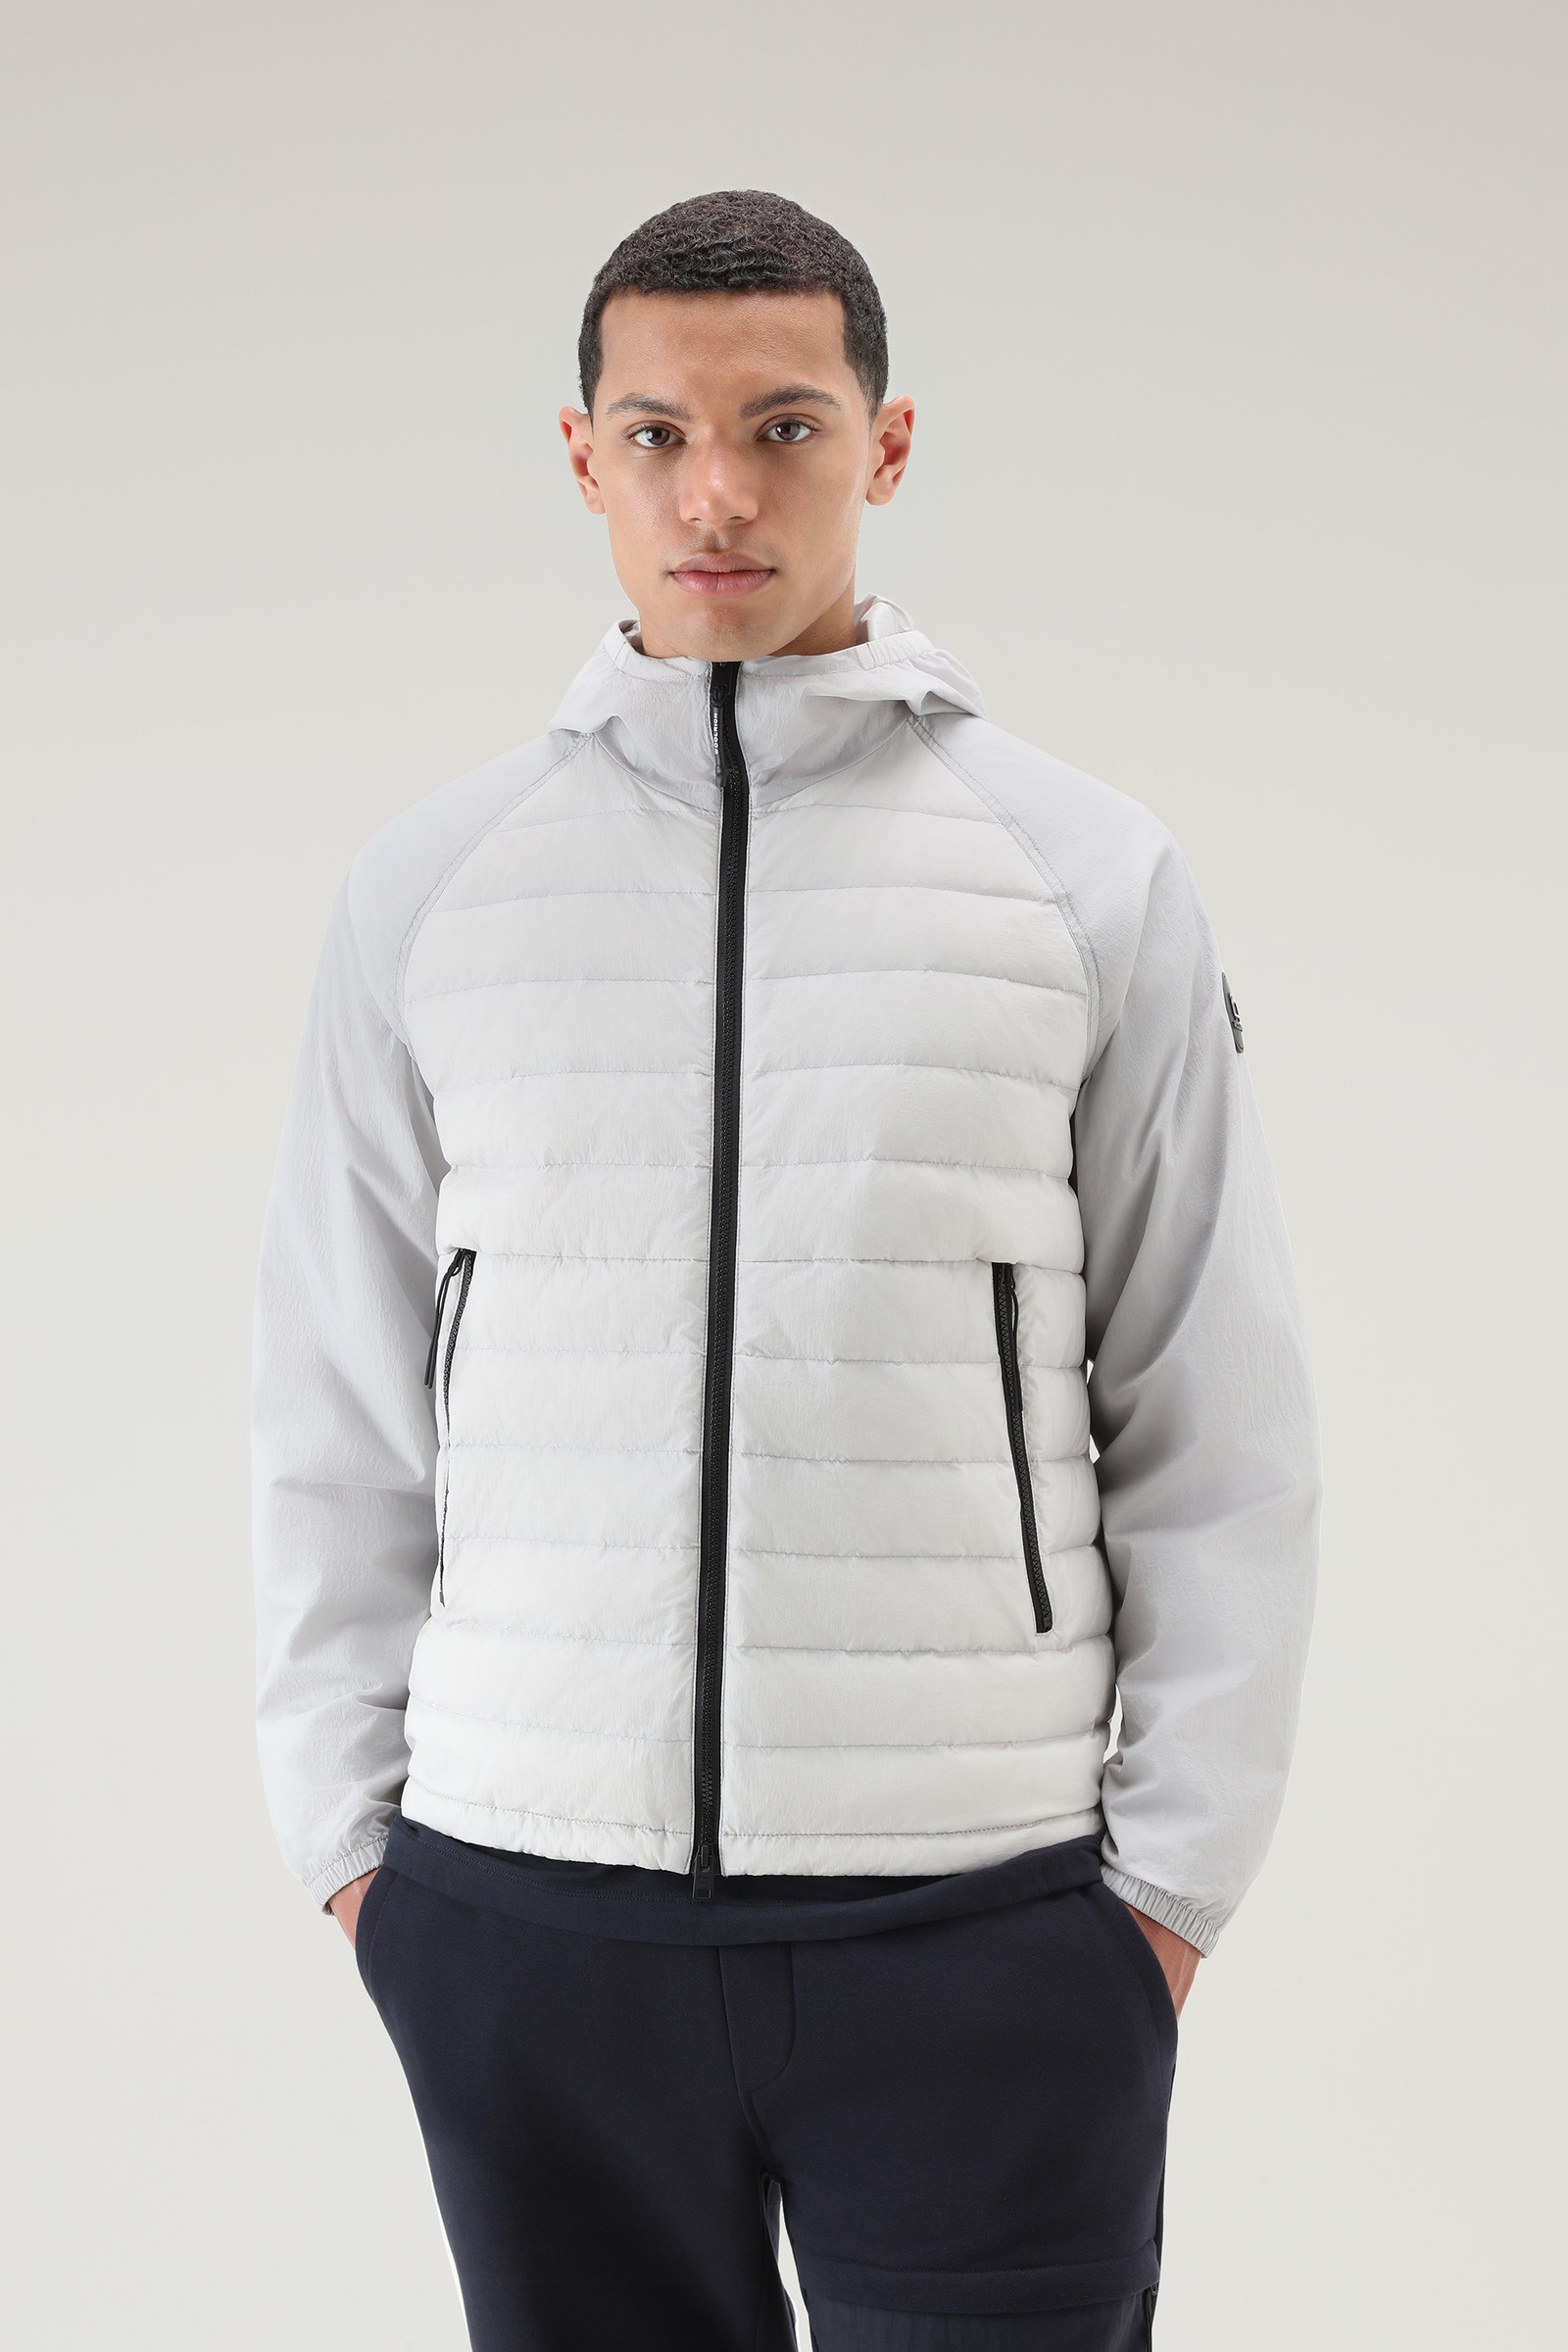 Hybrid Jacket in Crinkle Nylon with quilted front and Hood White ...